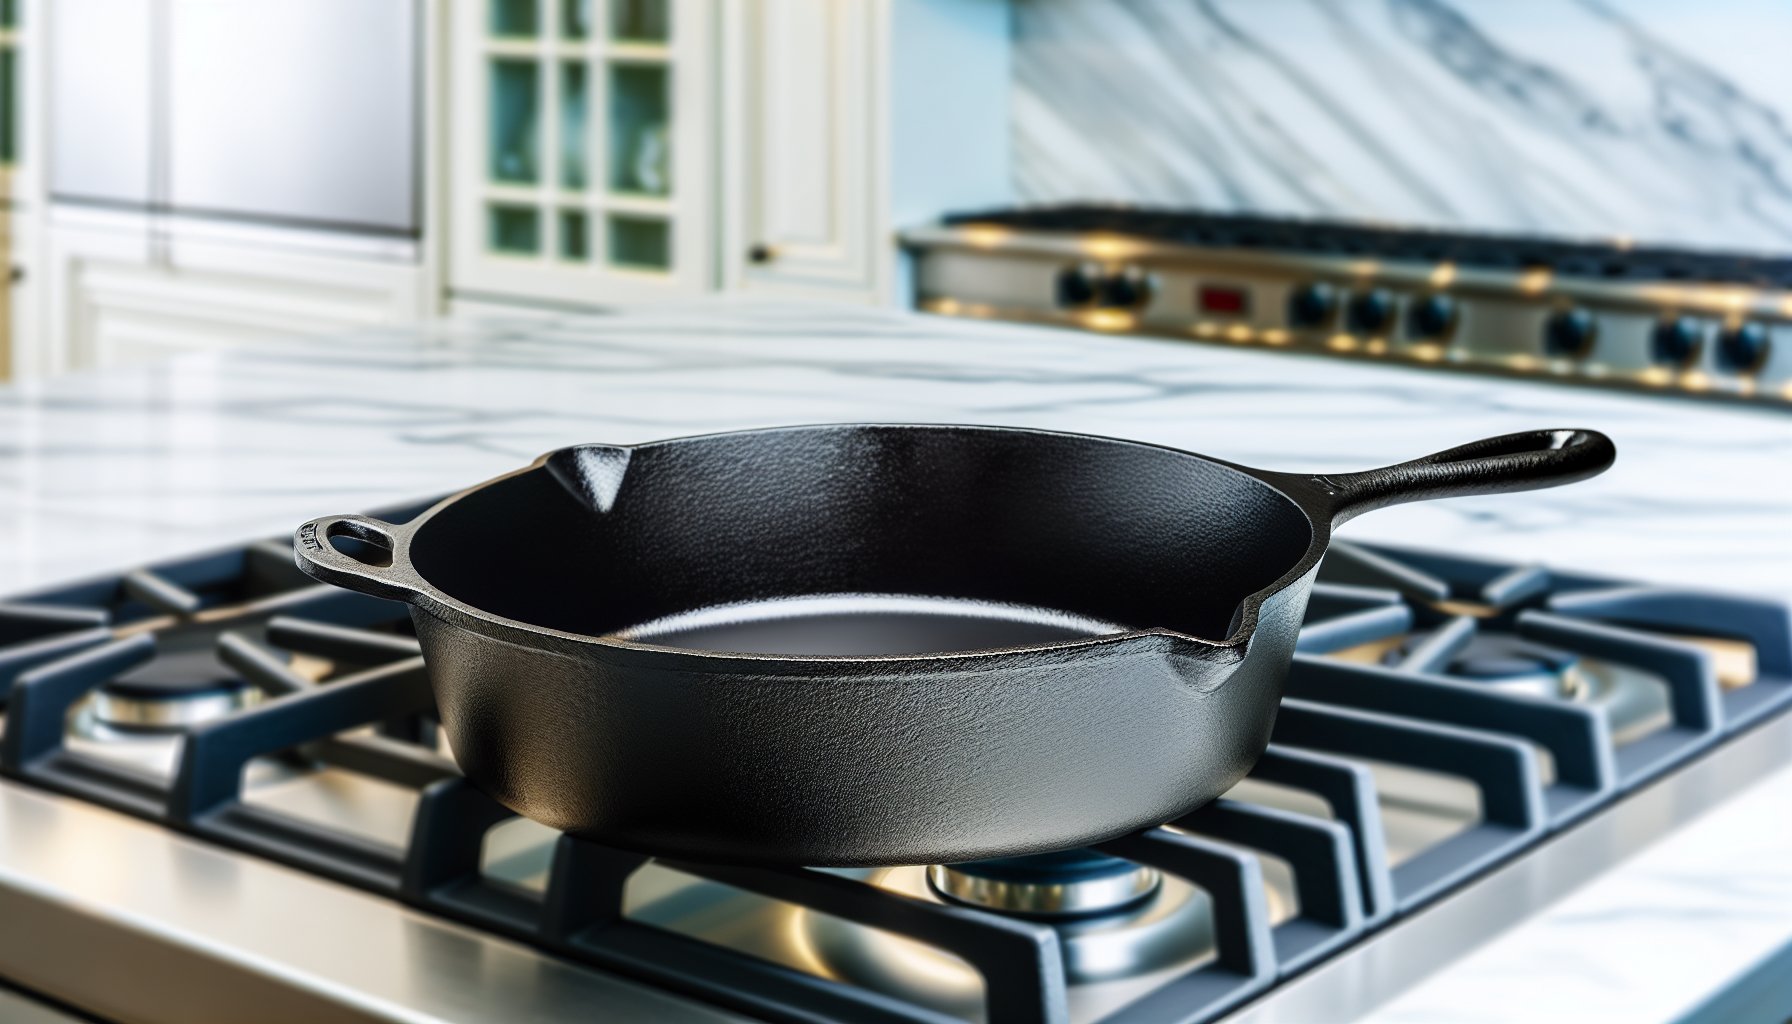 A well-seasoned cast iron skillet is a must-have in the kitchen